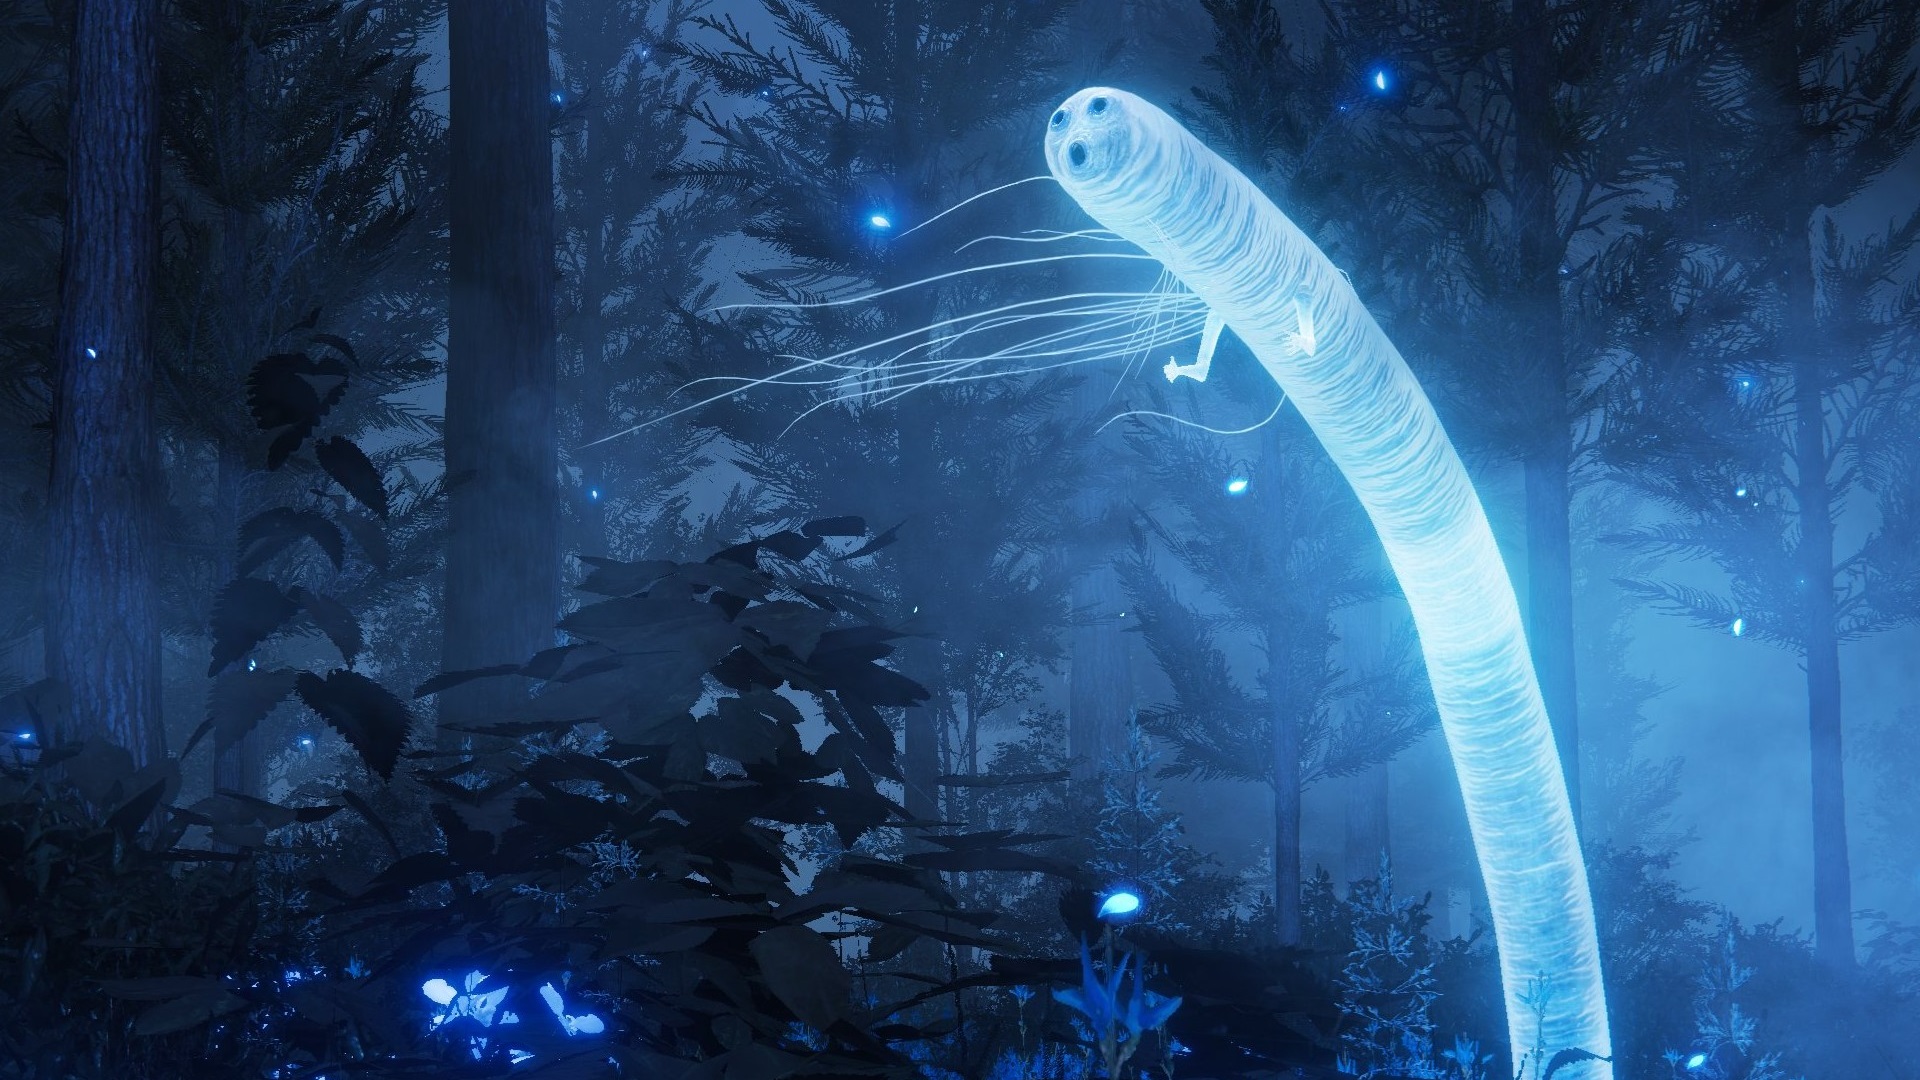 Everybody loves the goofy glowing worm guy coming in Elden Ring's DLC, but  we're also terrified something bad will happen to him